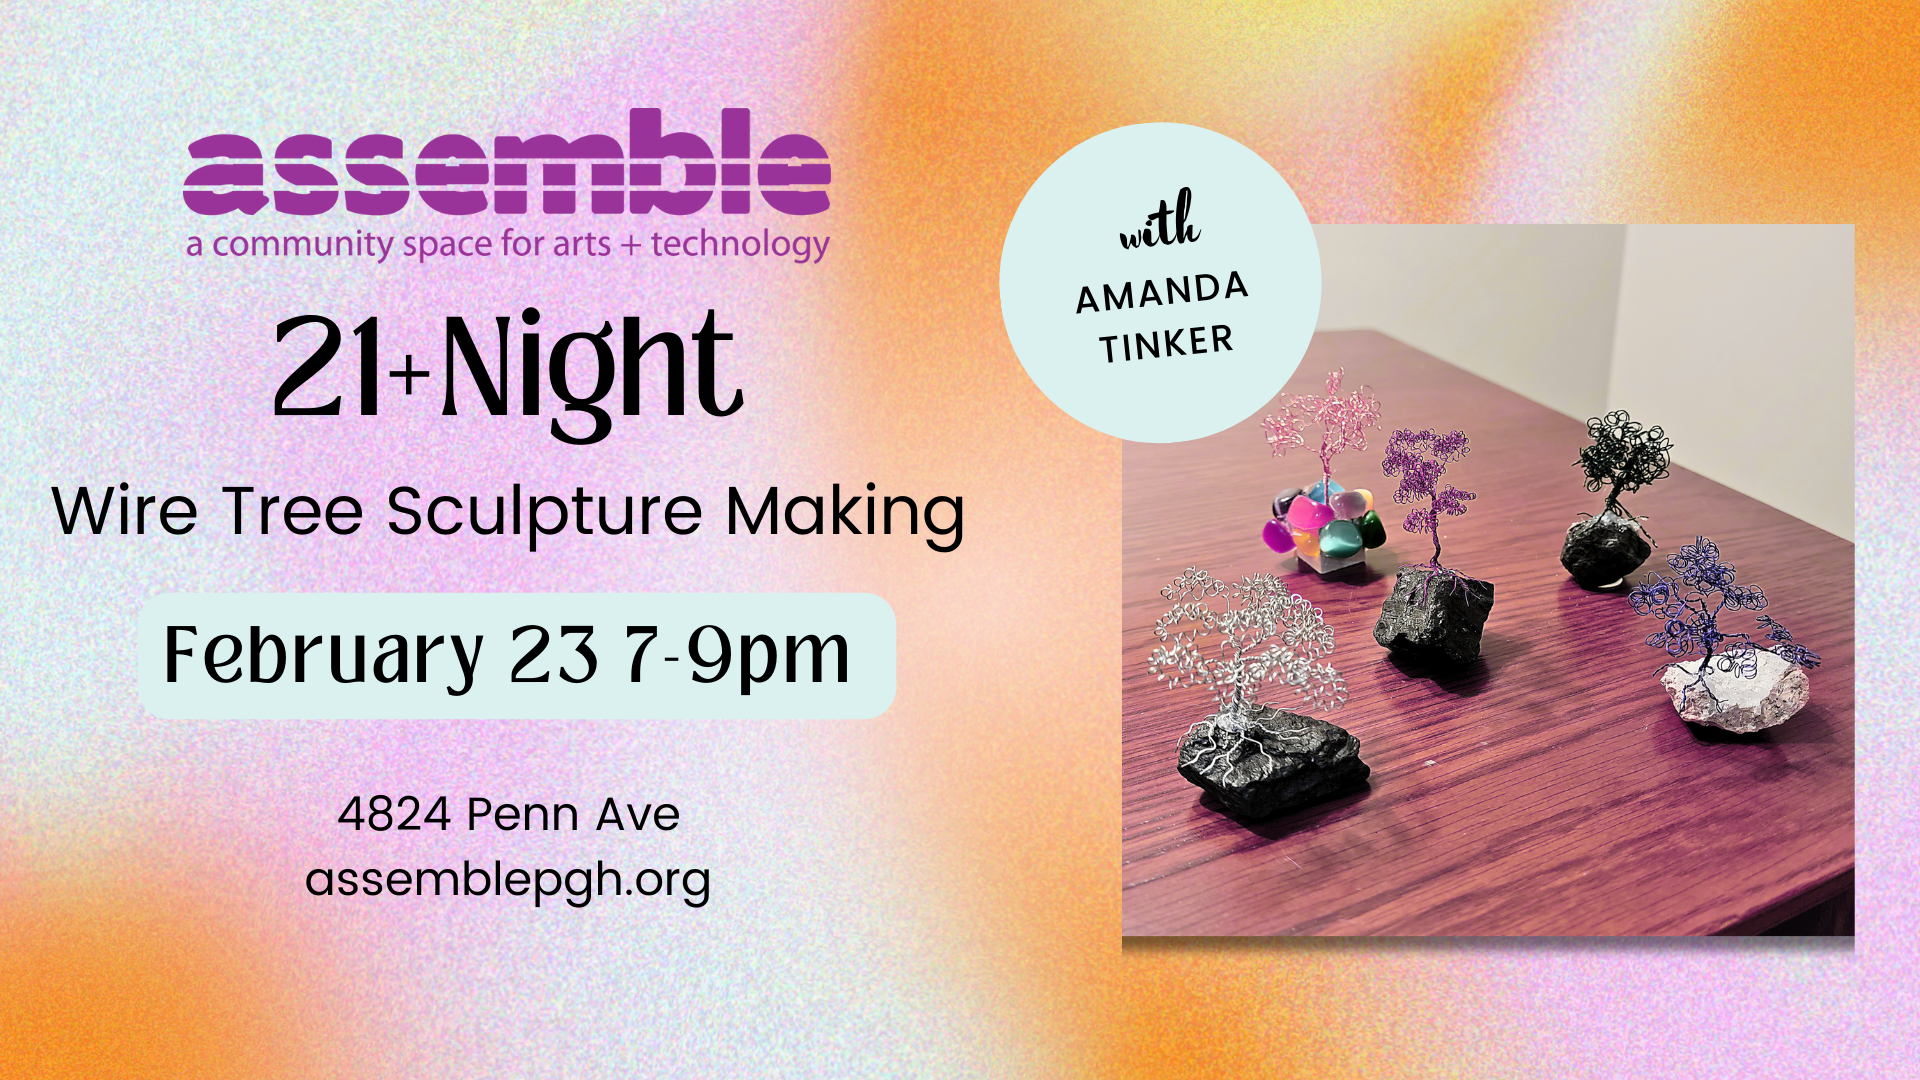 graphic with assemble logo, 21+ night wire tree sculpture making February 23 7-9pm 4824 Penn Ave Pittsburgh PA 15224 with photo of wire tree sculptures